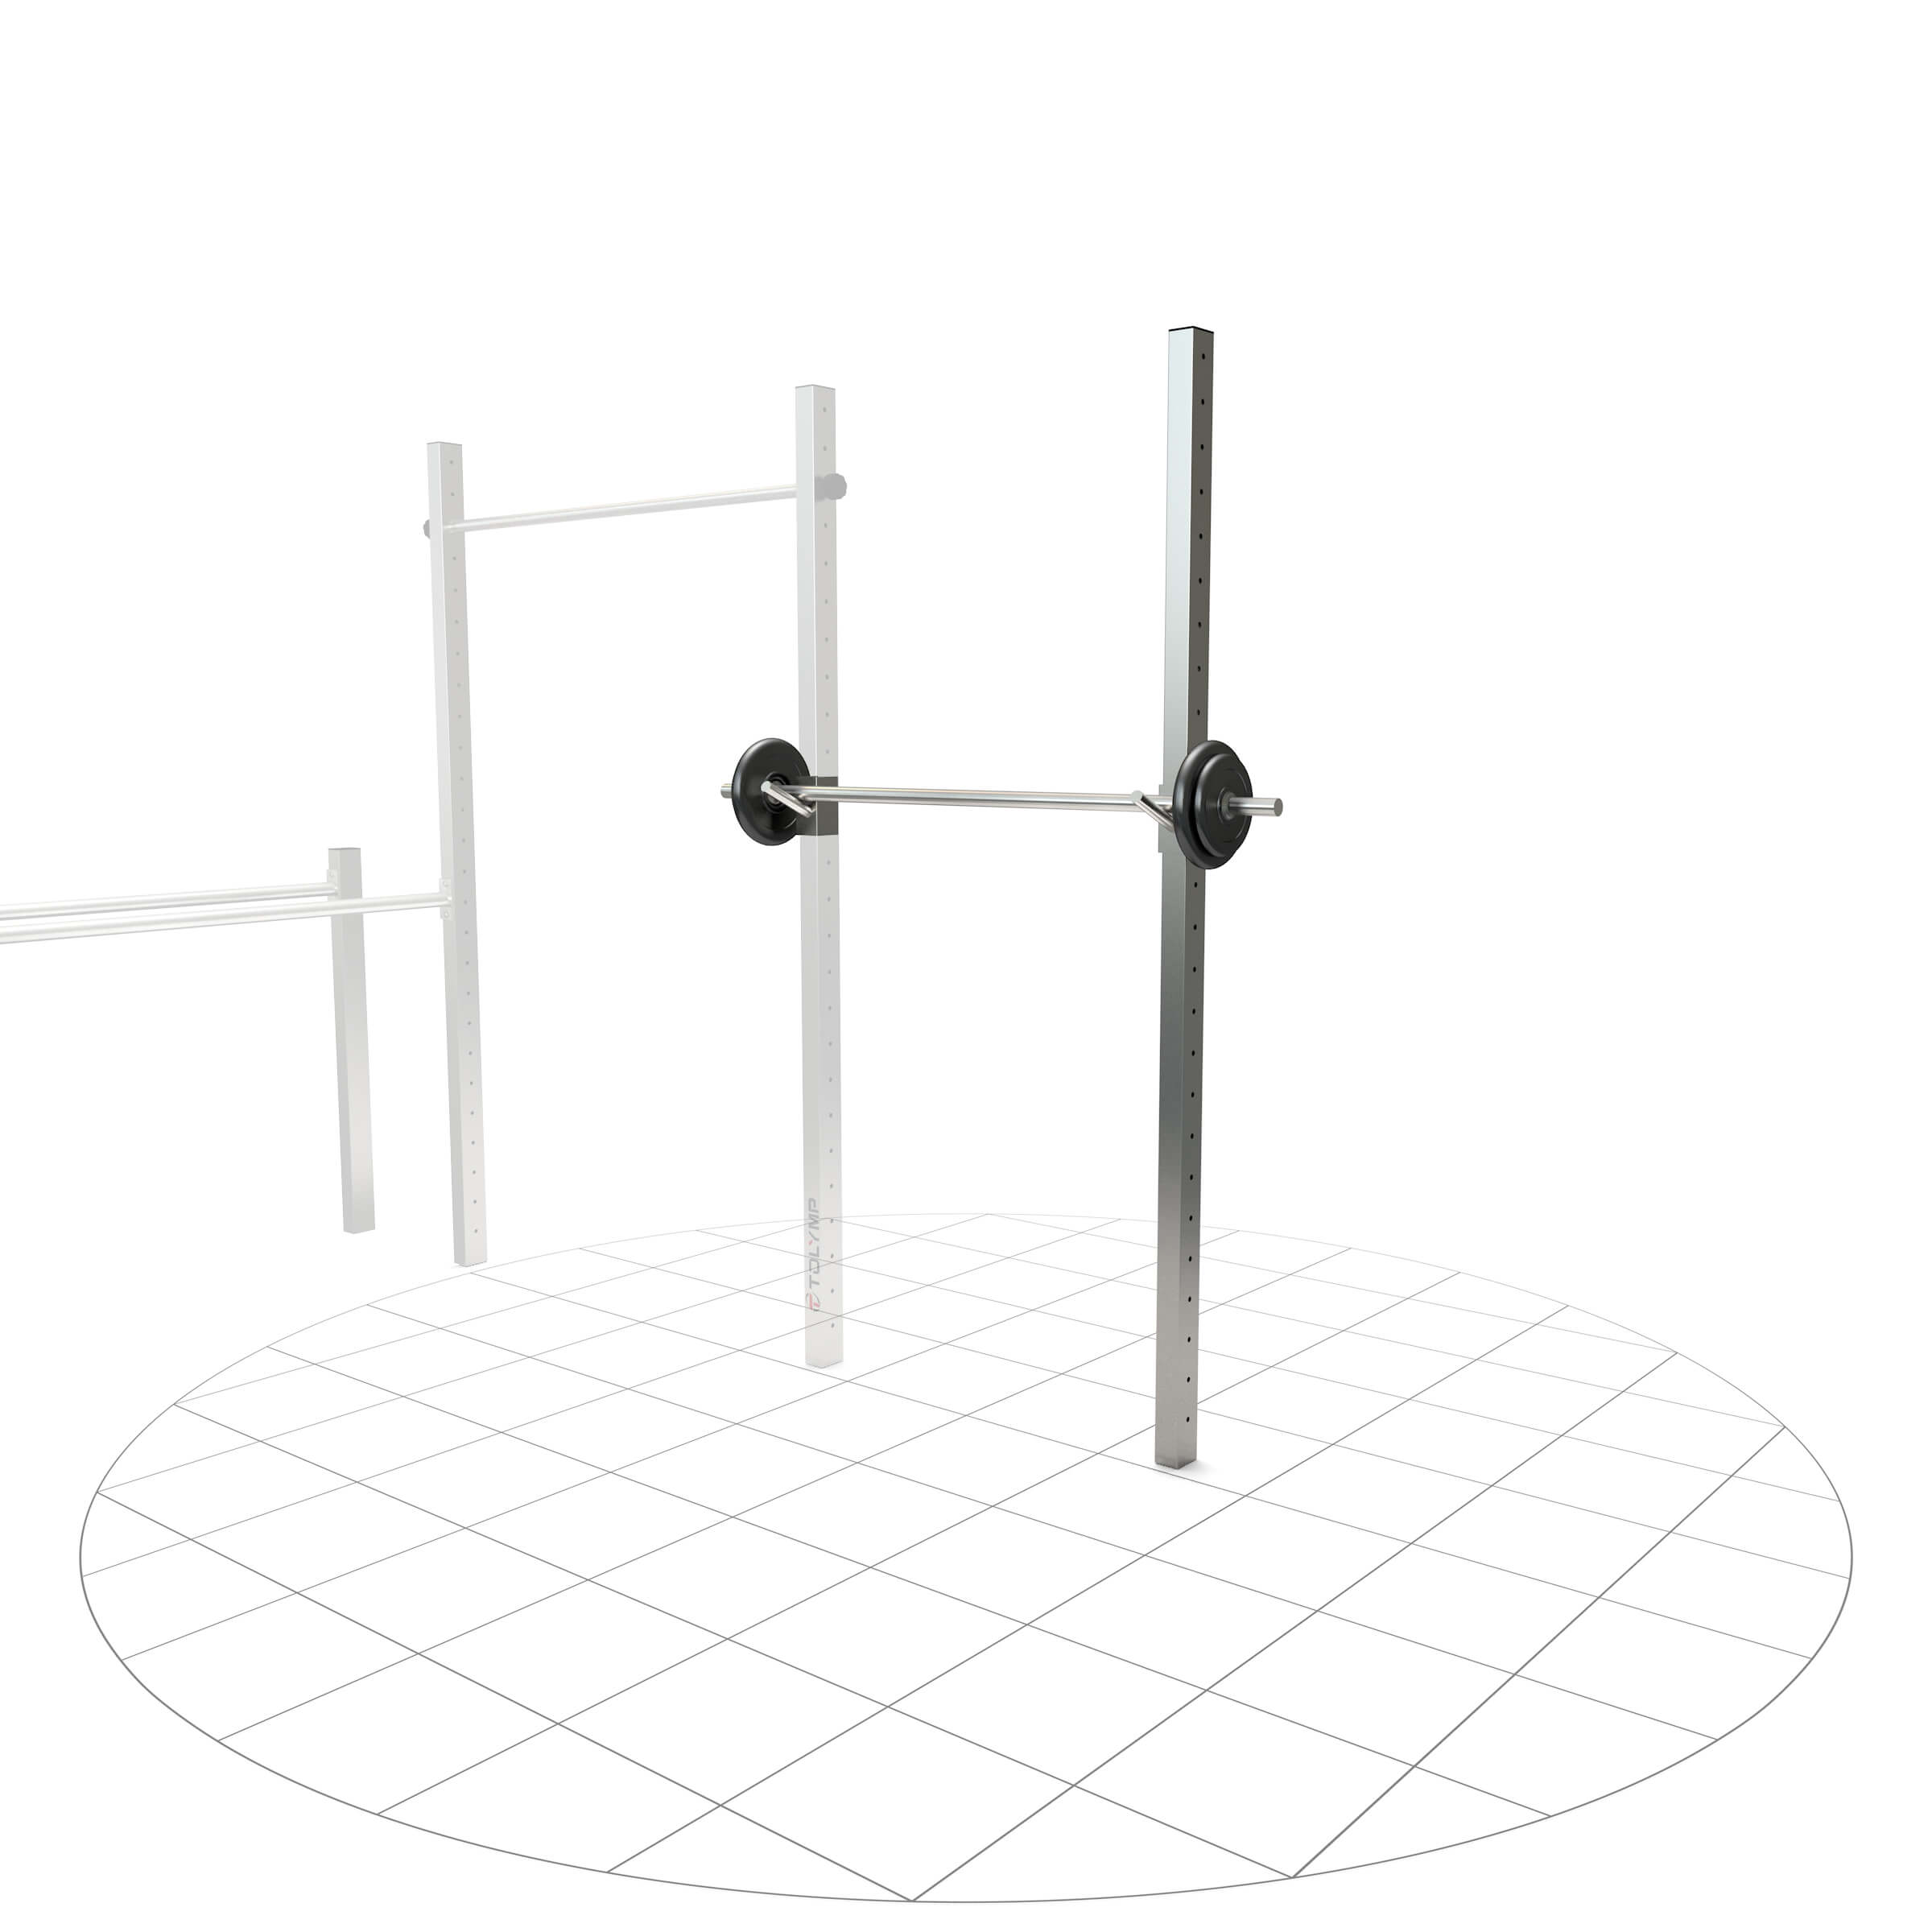 Barbell holder with mounting post